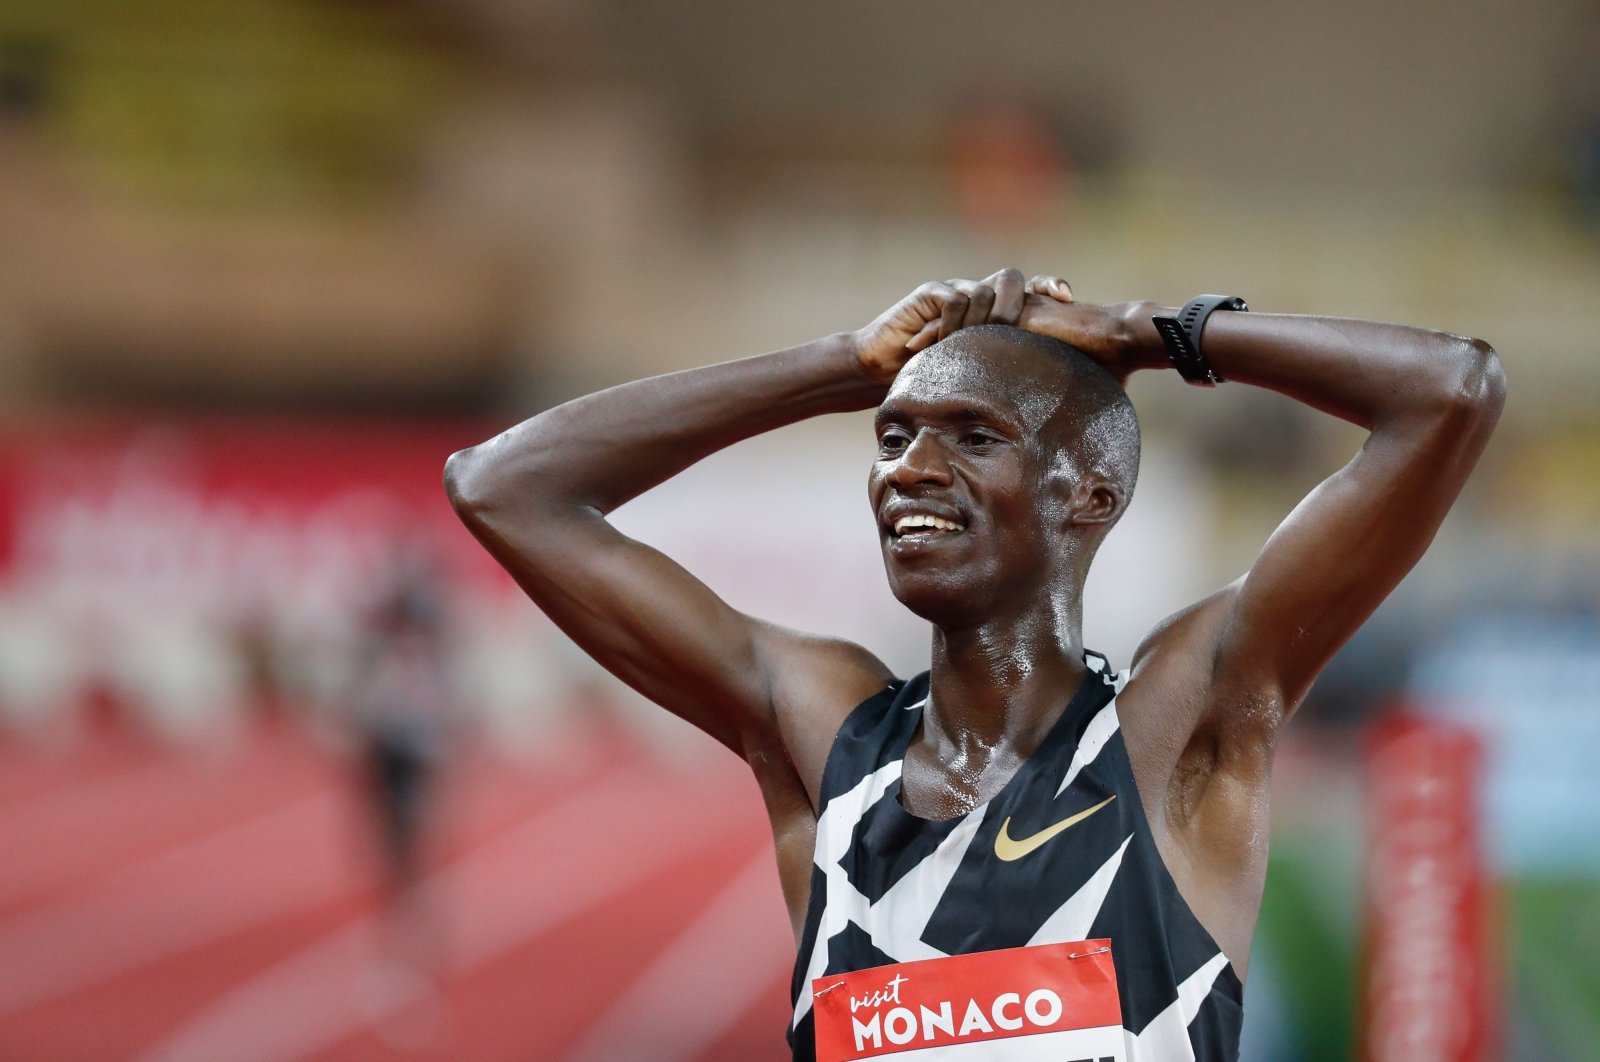 Uganda's Joshua Cheptegei celebrates after winning and breaking the world record in the men's 5000metre event during the Diamond League Athletics Meeting at The Louis II Stadium in Monaco on August 14, 2020. (AFP Photo)